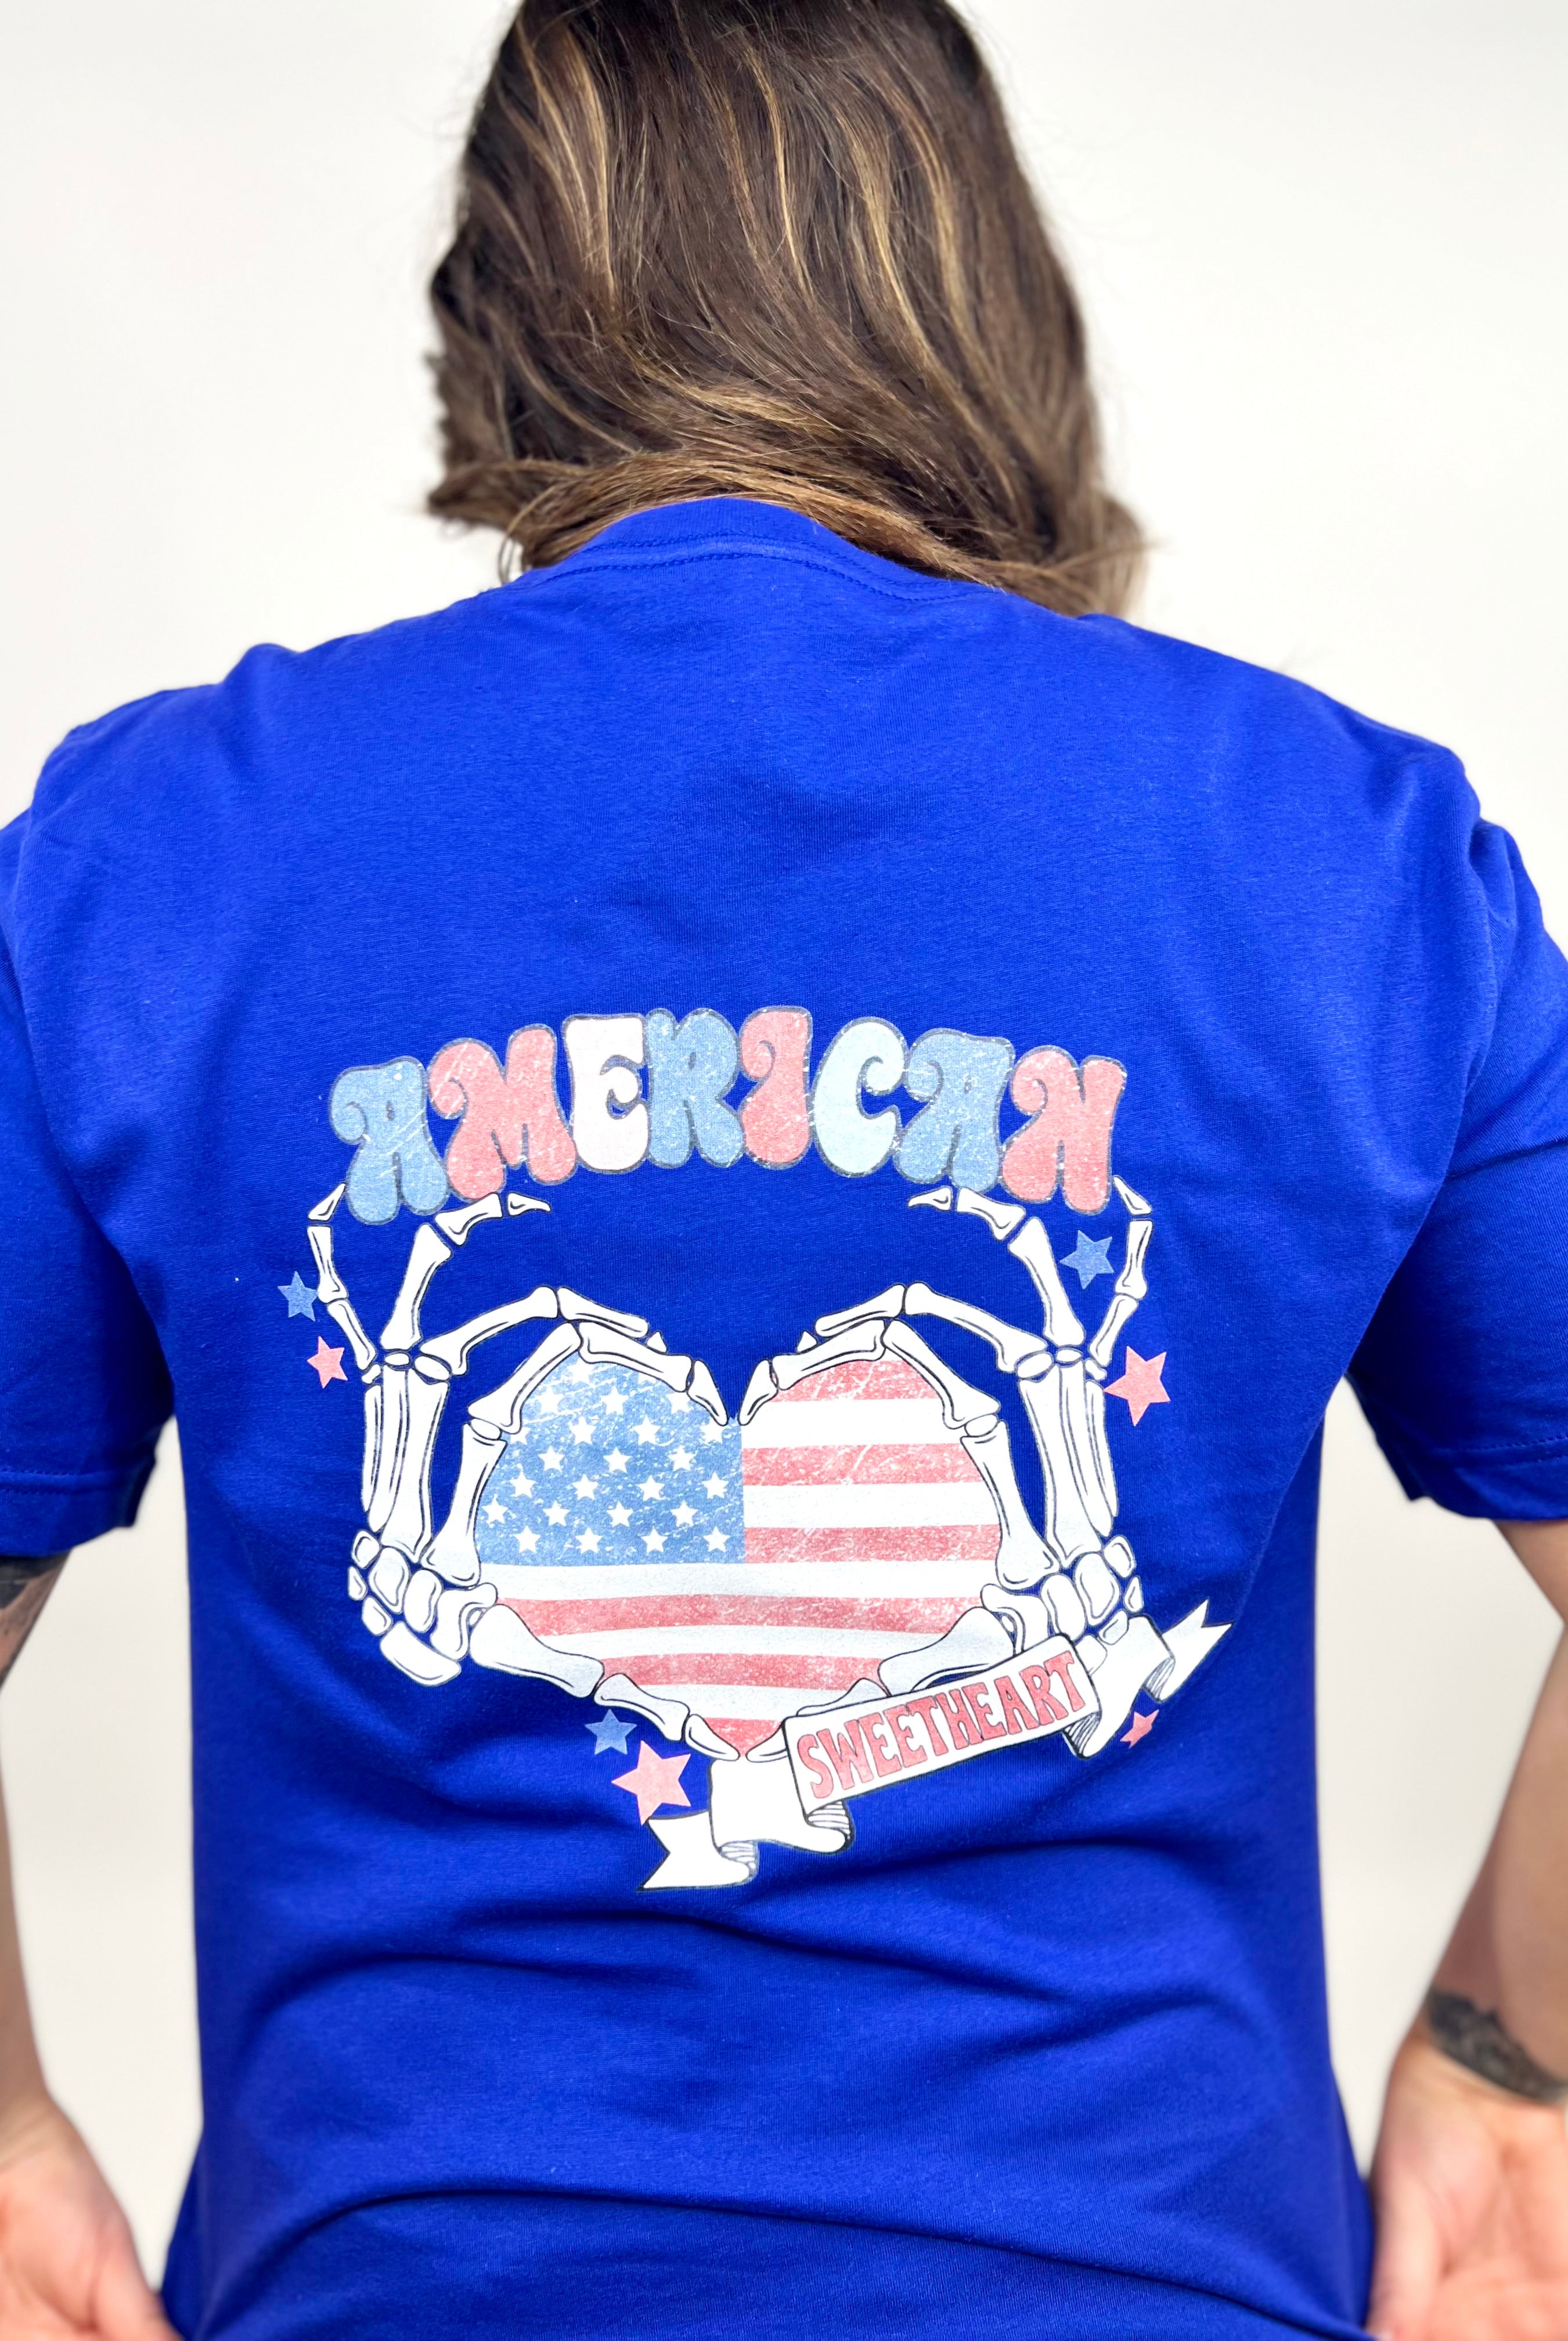 American Sweetheart Skully Graphic Tee-130 Graphic Tees-Heathered Boho-Heathered Boho Boutique, Women's Fashion and Accessories in Palmetto, FL